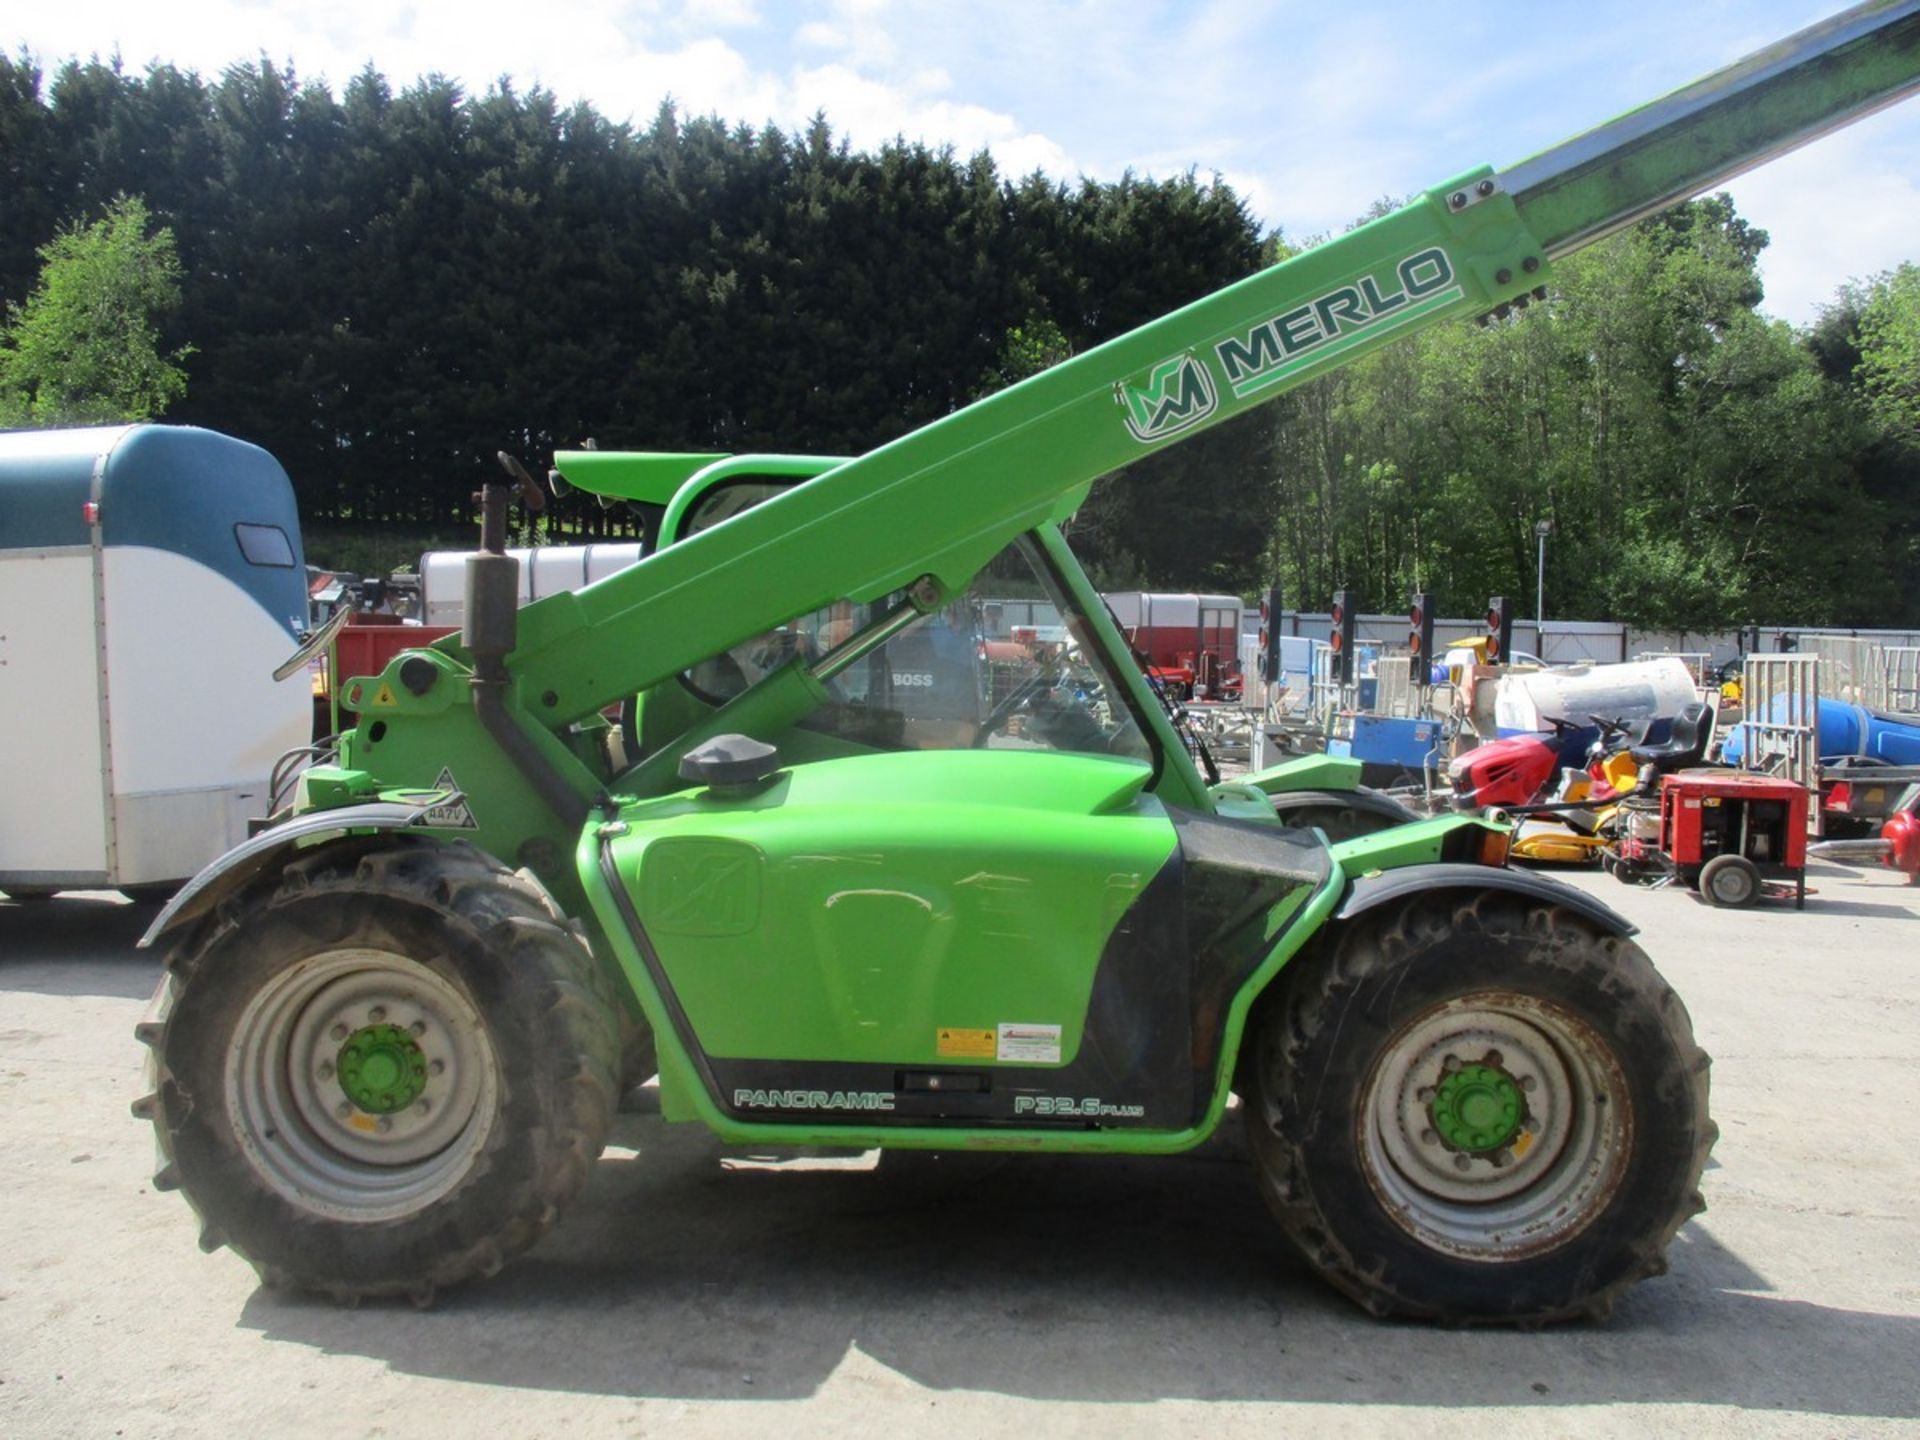 MERLO P326 PLUS TELEHANDLER (YR 2008) 6138HRS SHOWING,WA58FHG, 2 OWNERS, V5 - Image 4 of 7